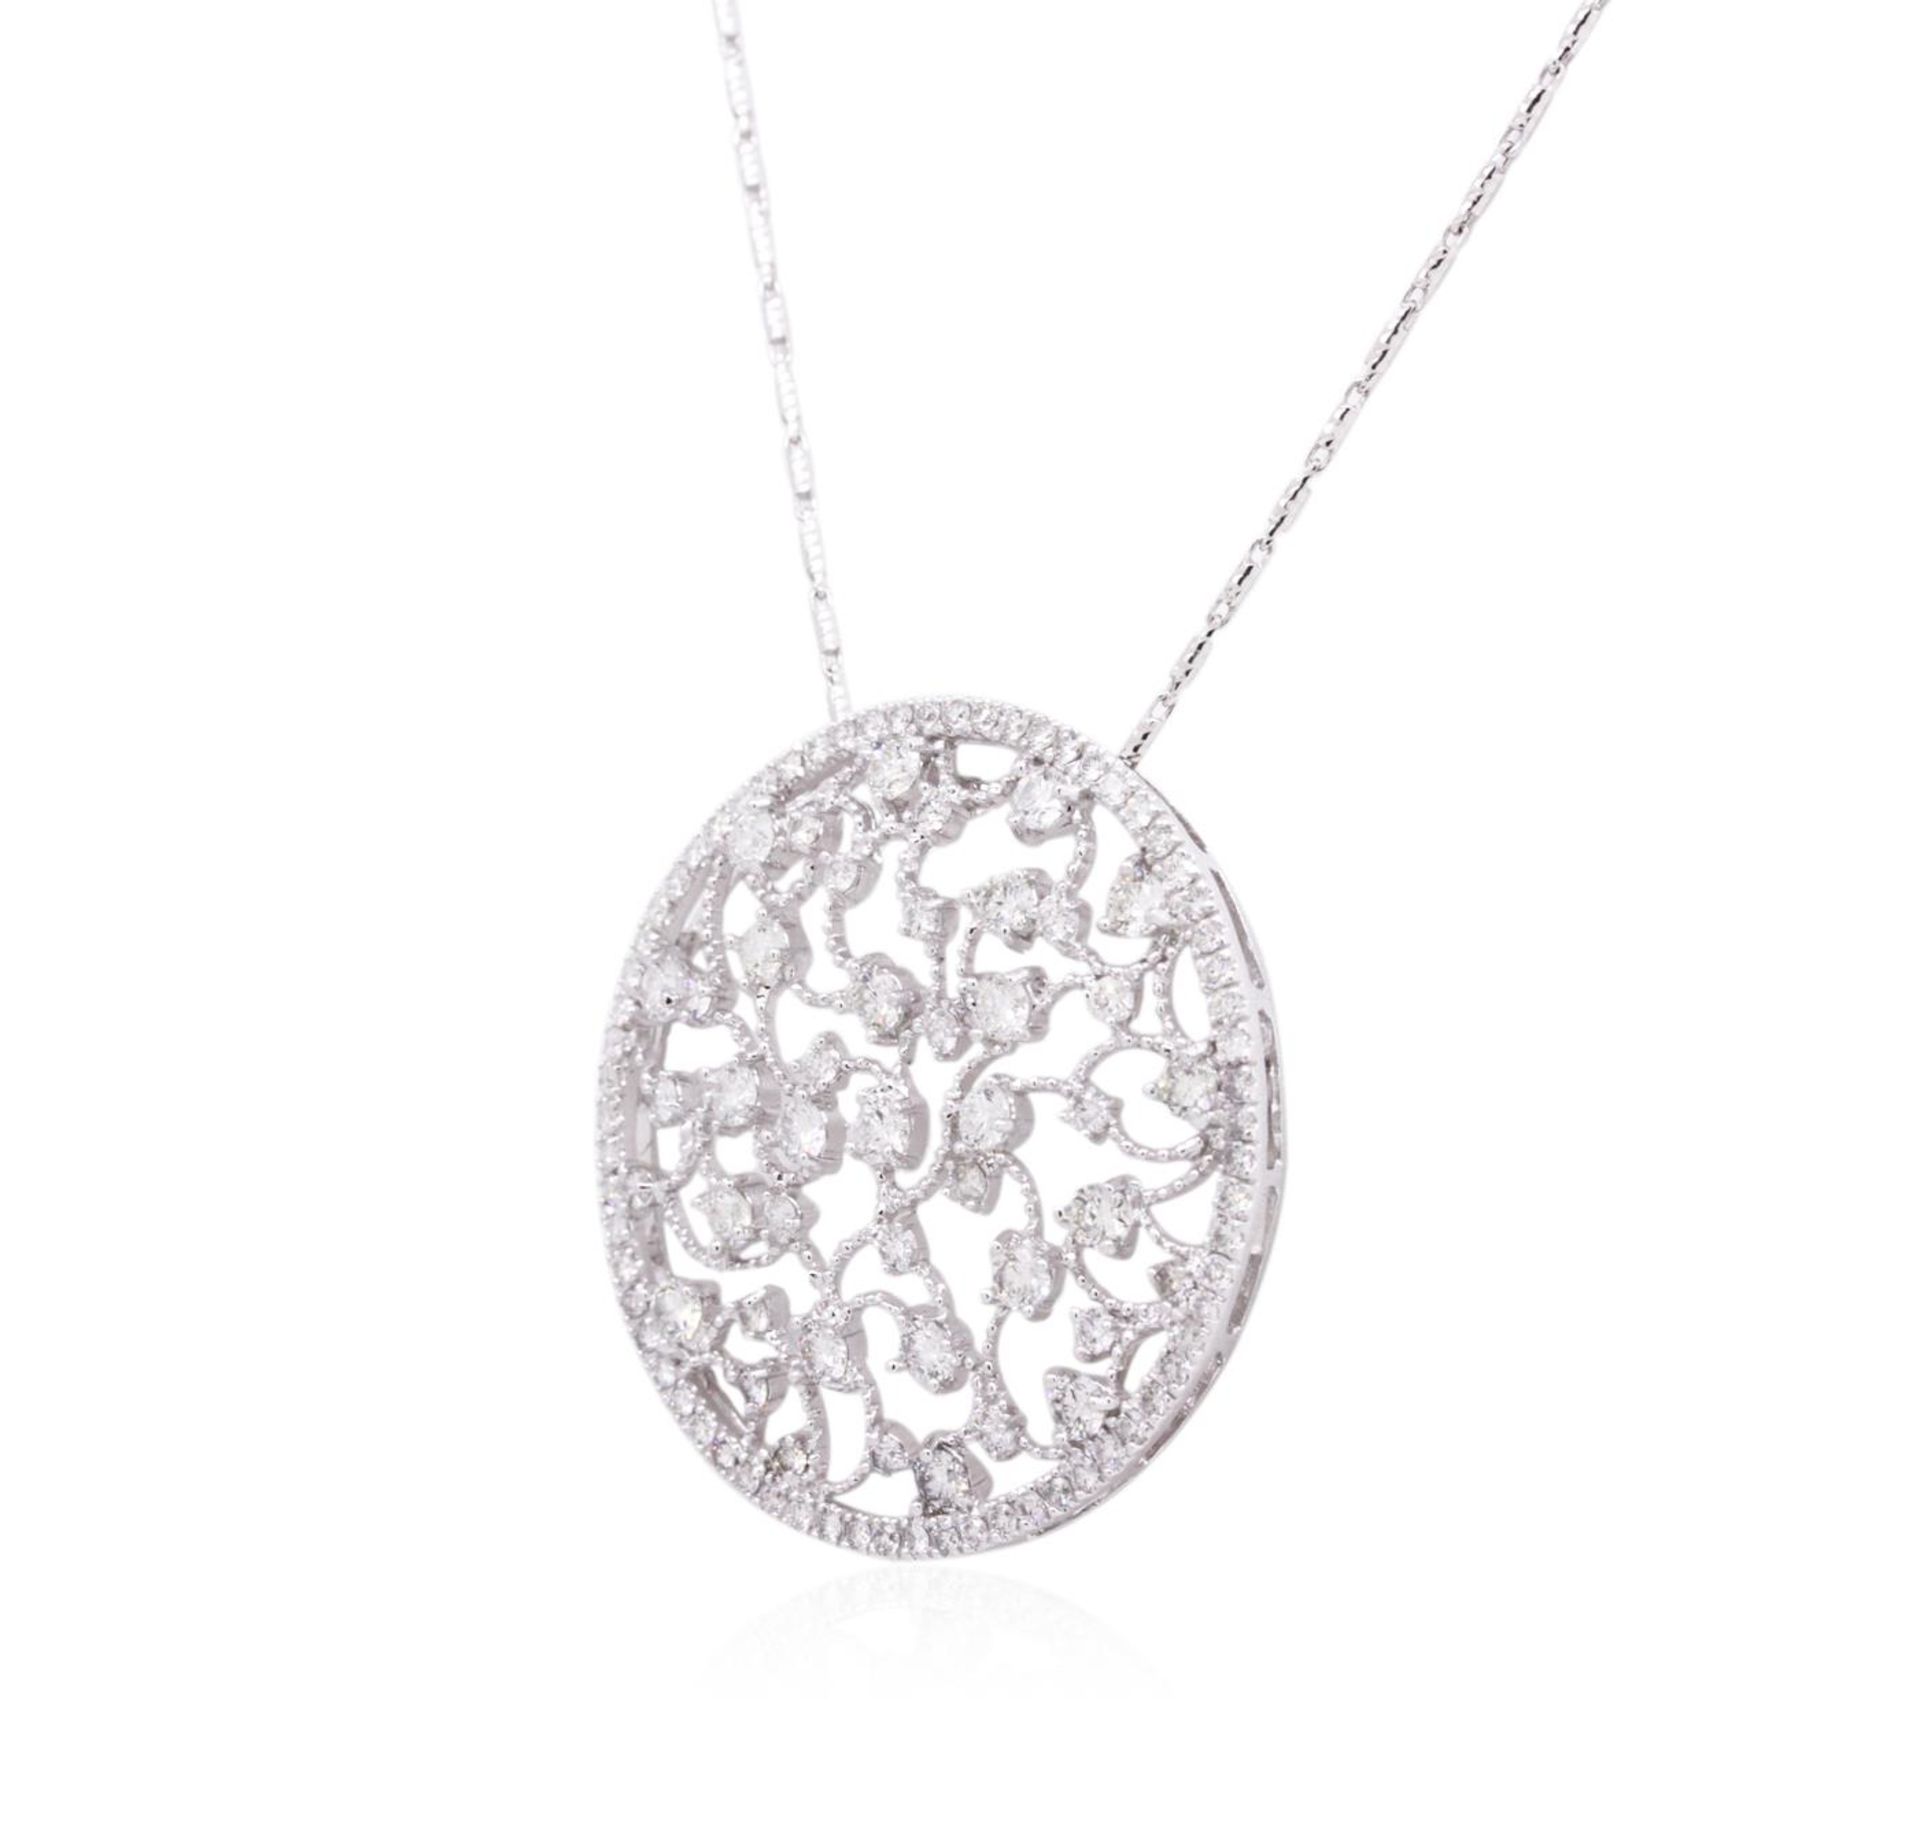 14KT White Gold 1.25 ctw Diamond Pendant With Chain - Image 3 of 4